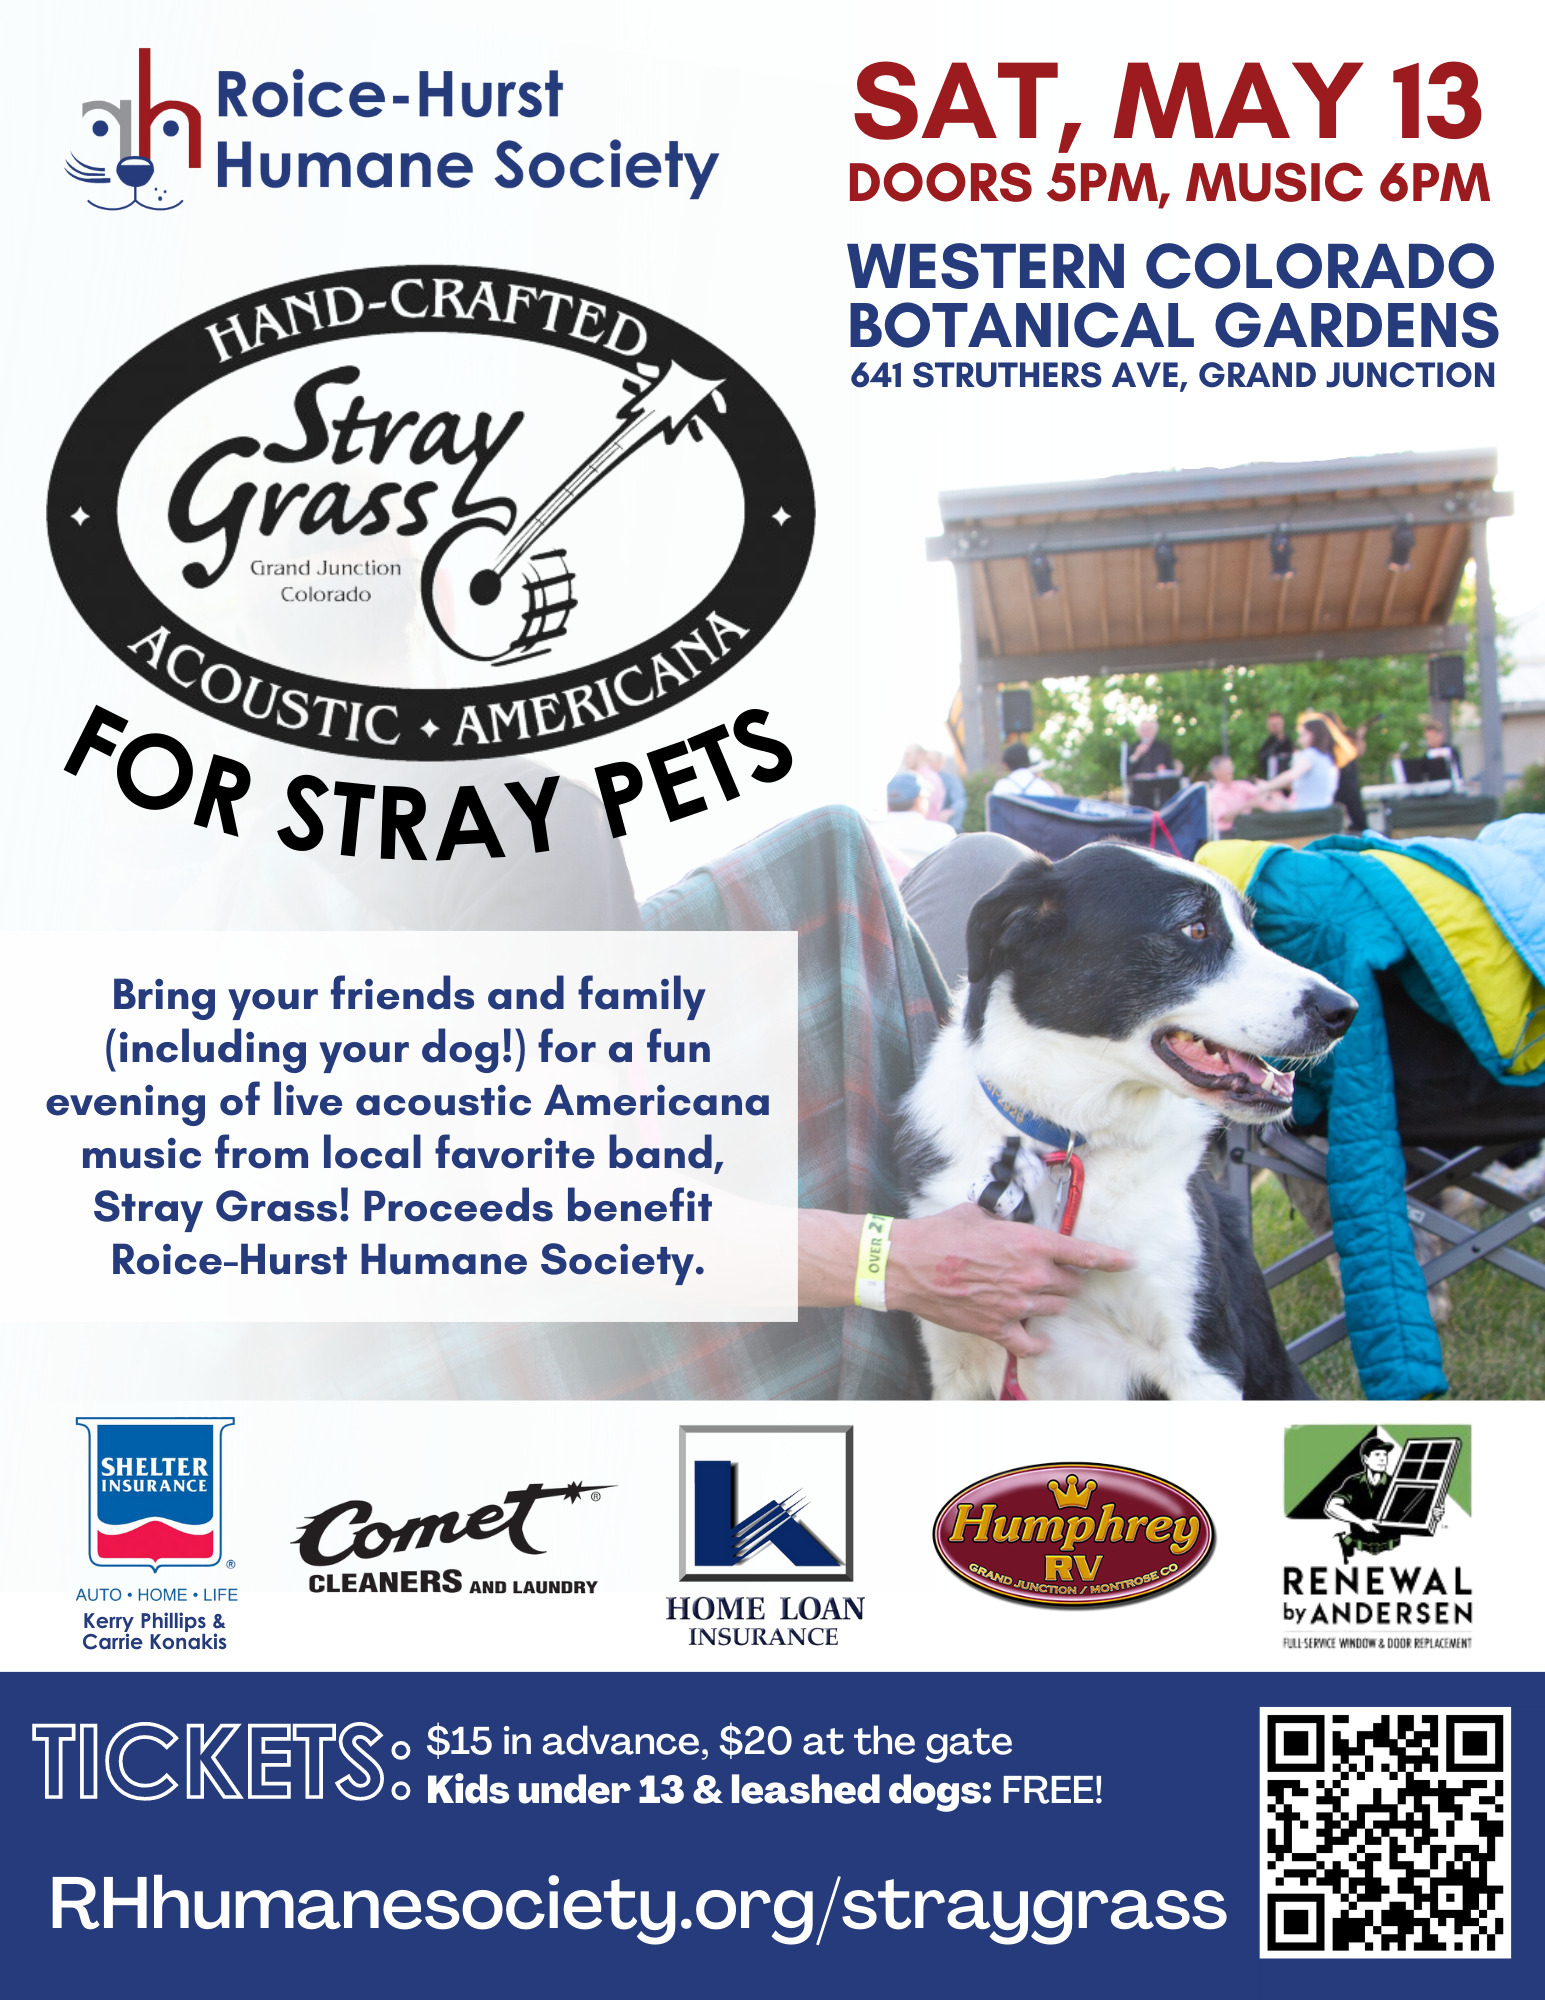 Stray Grass for Stray Pets Poster